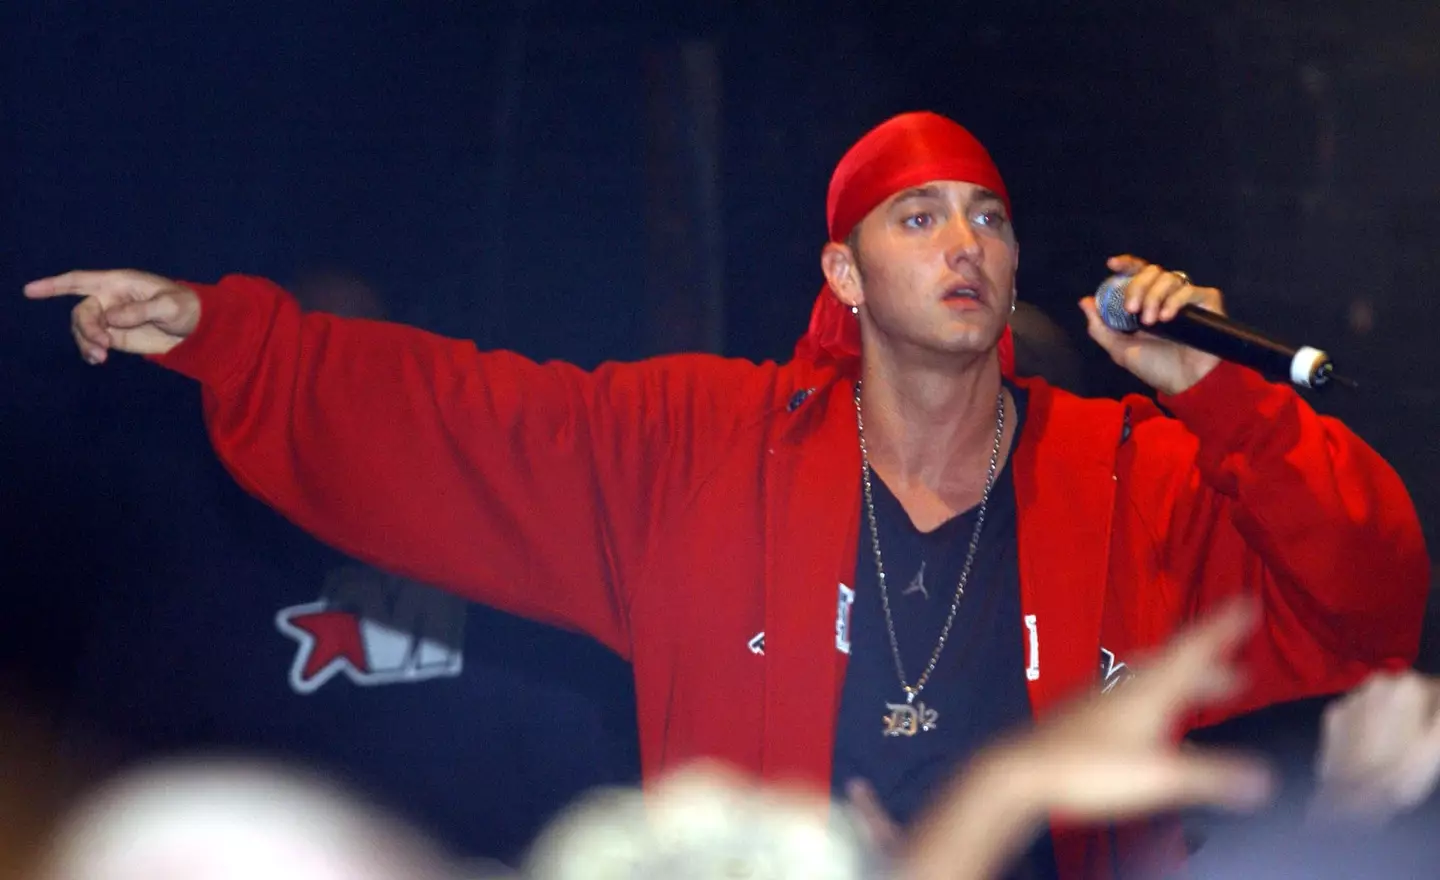 The feud between Eminem and Christina Aguilera started back in 2000.